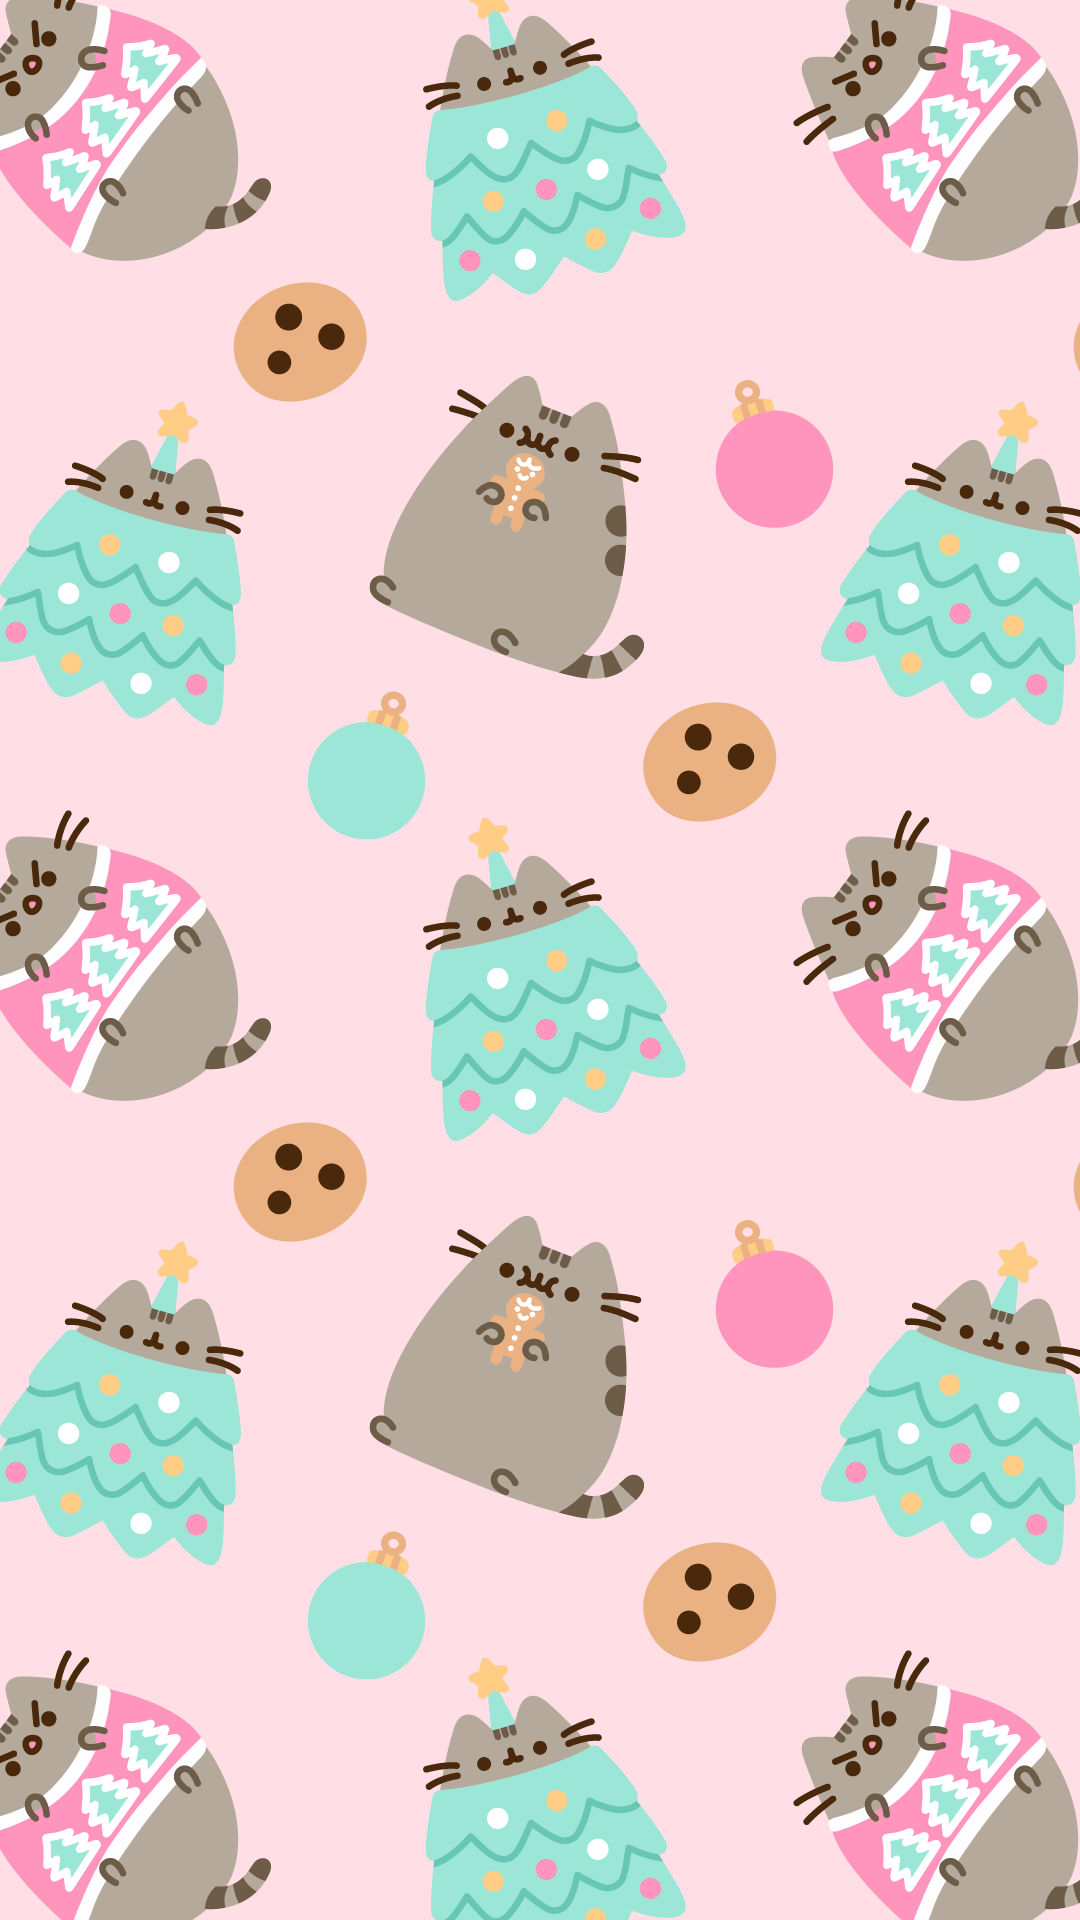 Go Into Gallery And Set As 'wallpaper' Pusheen Wallpaper iPhone Wallpaper & Background Download